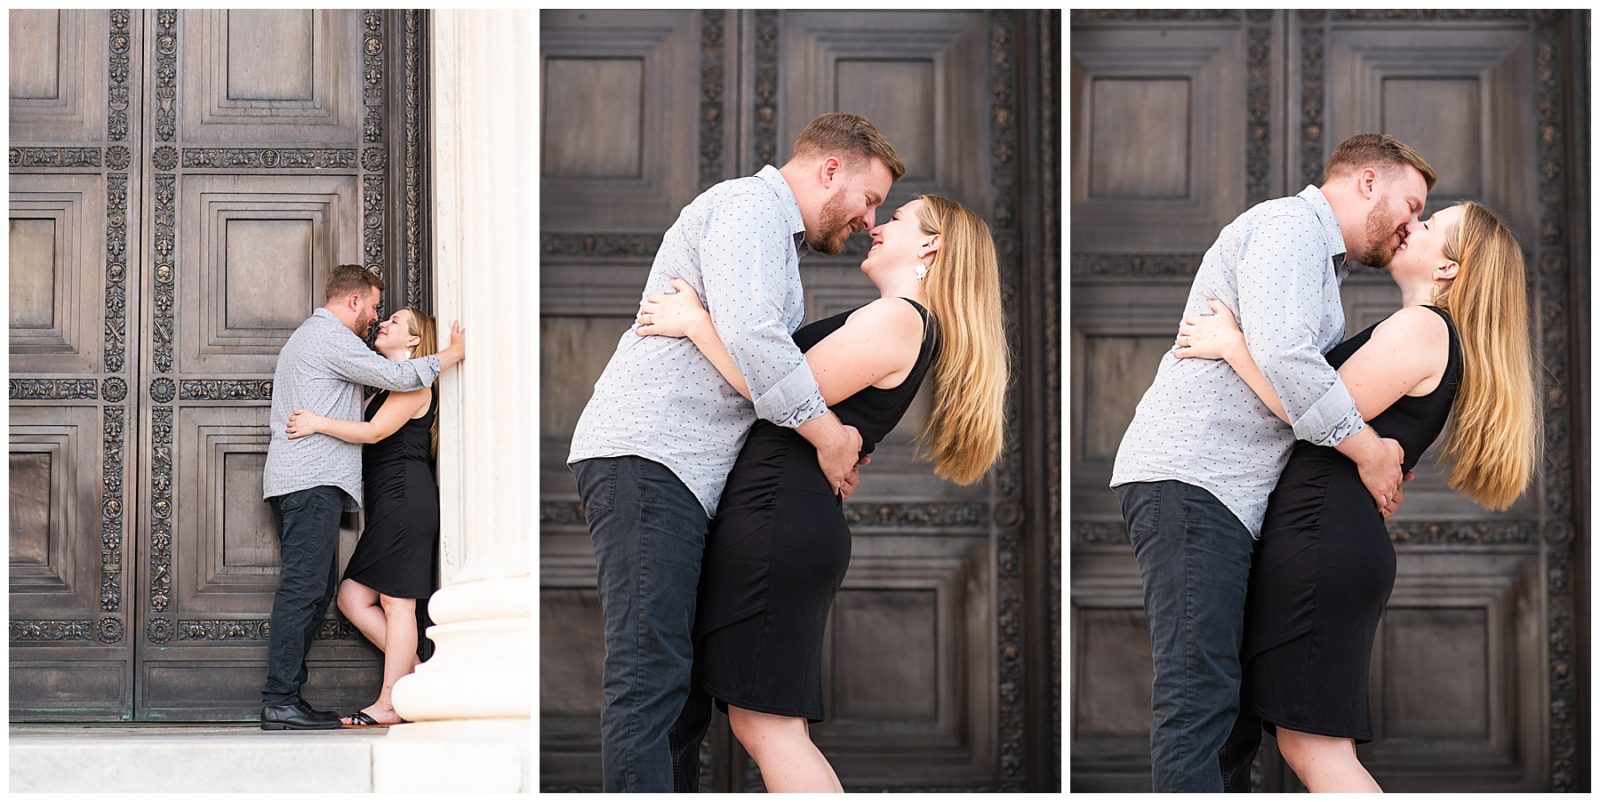 A Cleveland engagement session, wade lagoon photos, summer photos, sweet and candid photos, romantic engagement photos, outfit ideas, marble steps, big columns at art museum for photos golden hour, glowy light